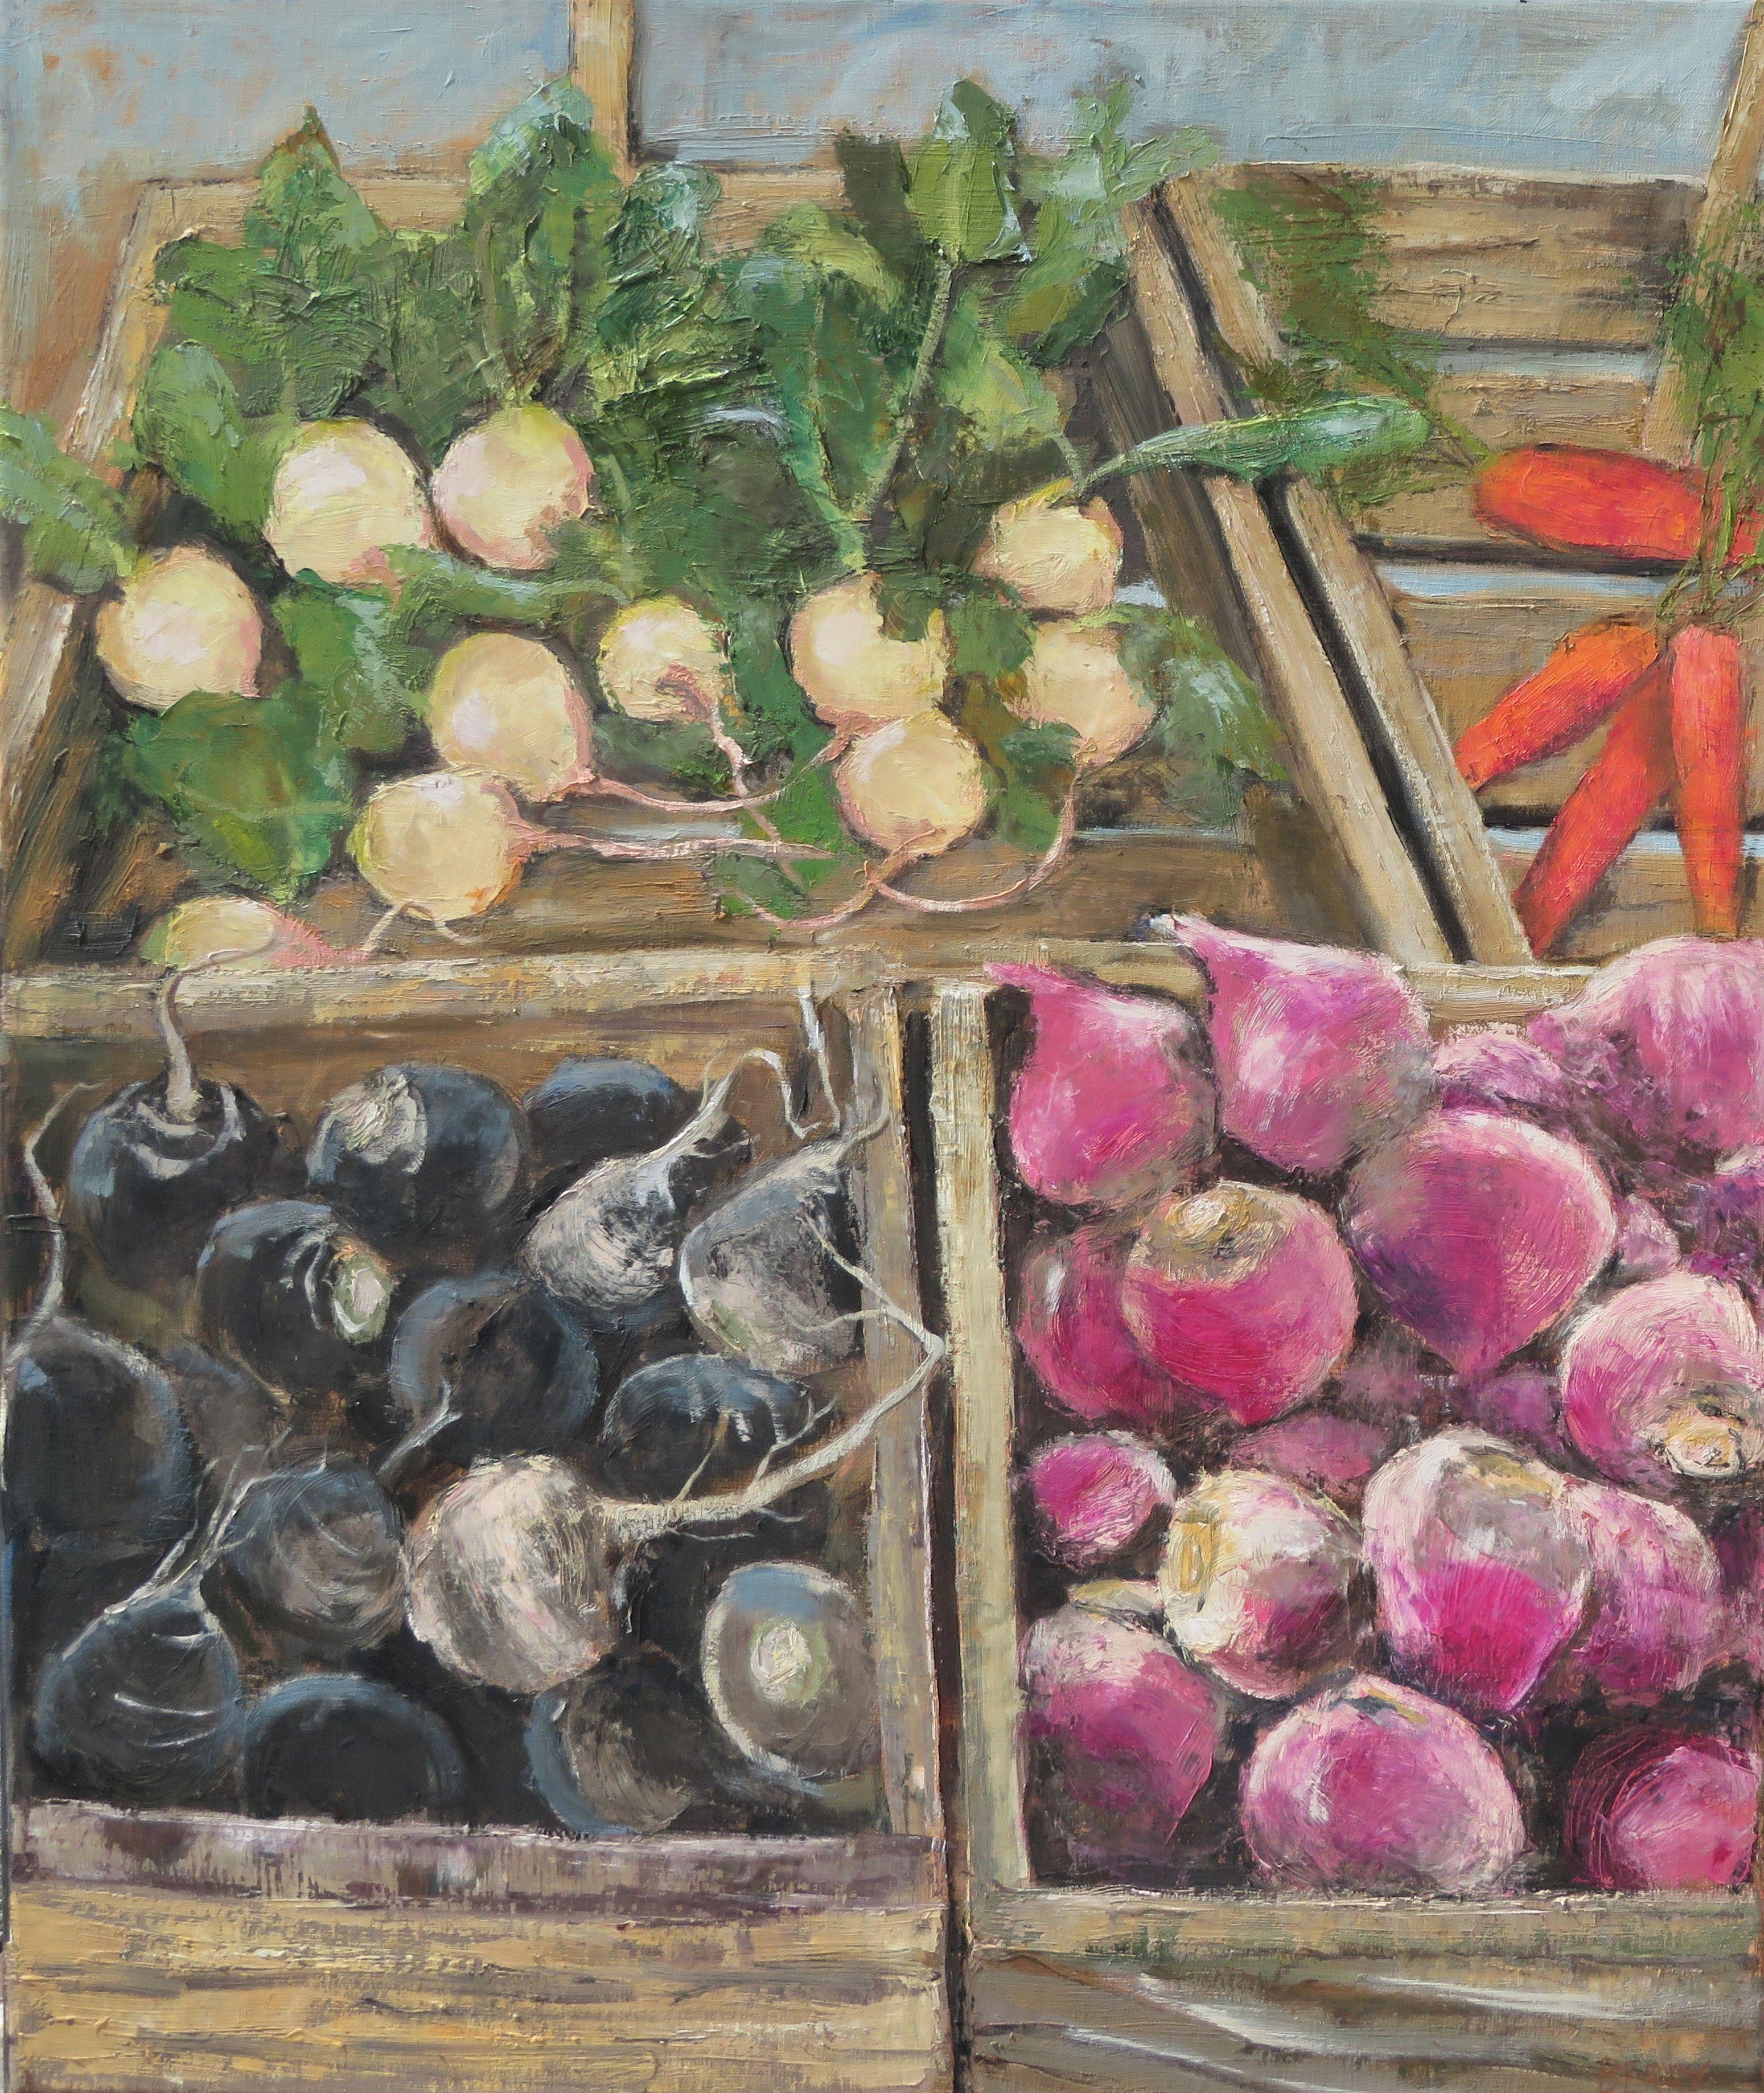 Black Spanish and Purple Diakons are the names of some of these Farmer's Market offerings.  They were crazy enough to inspire me to paint this picture of them.  This was done with quality oil paints and cold wax on linen. :: Painting :: Contemporary